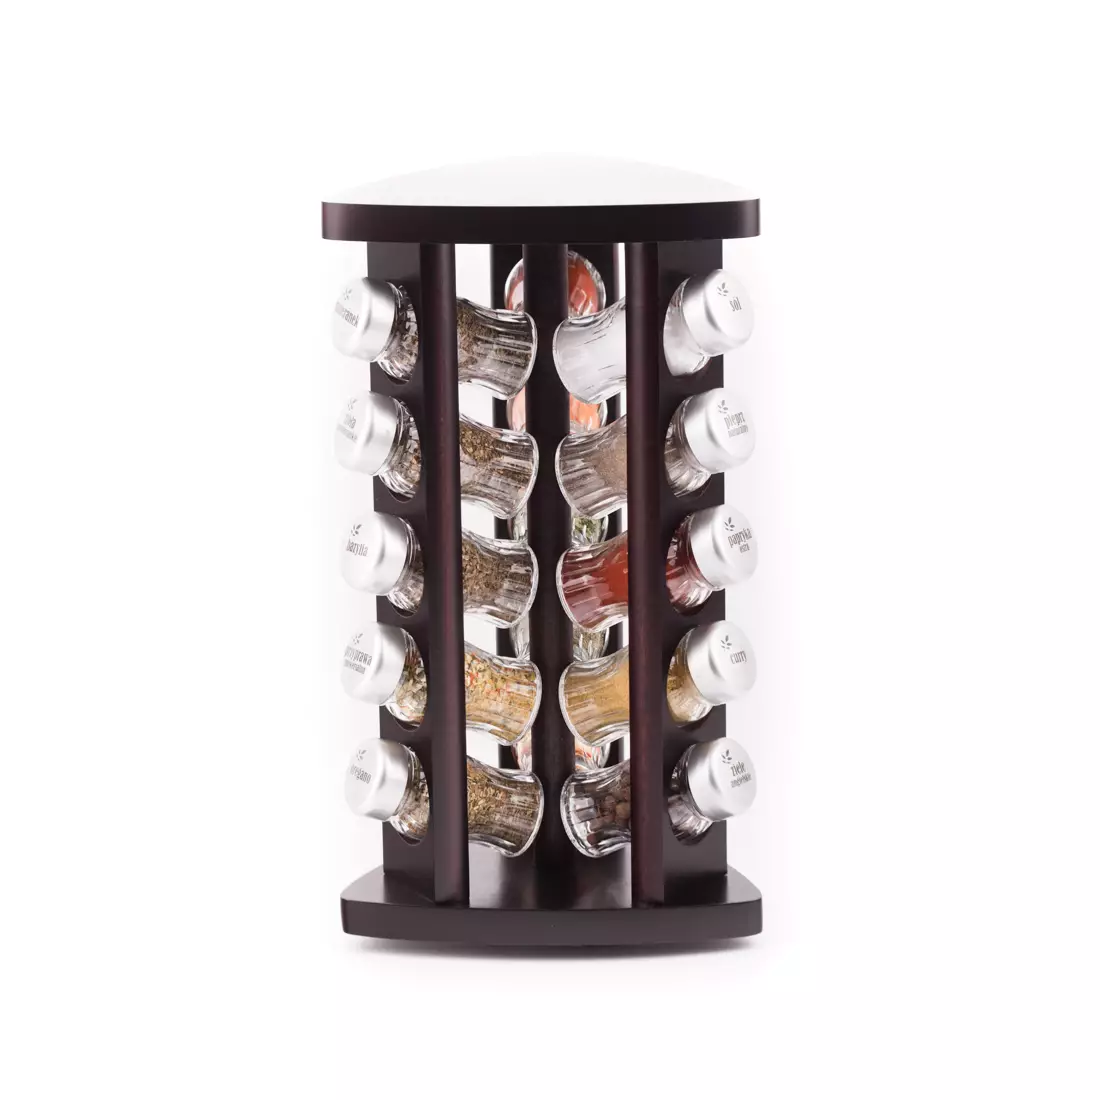 GALD 15S rotating rack with spices dark brown matt